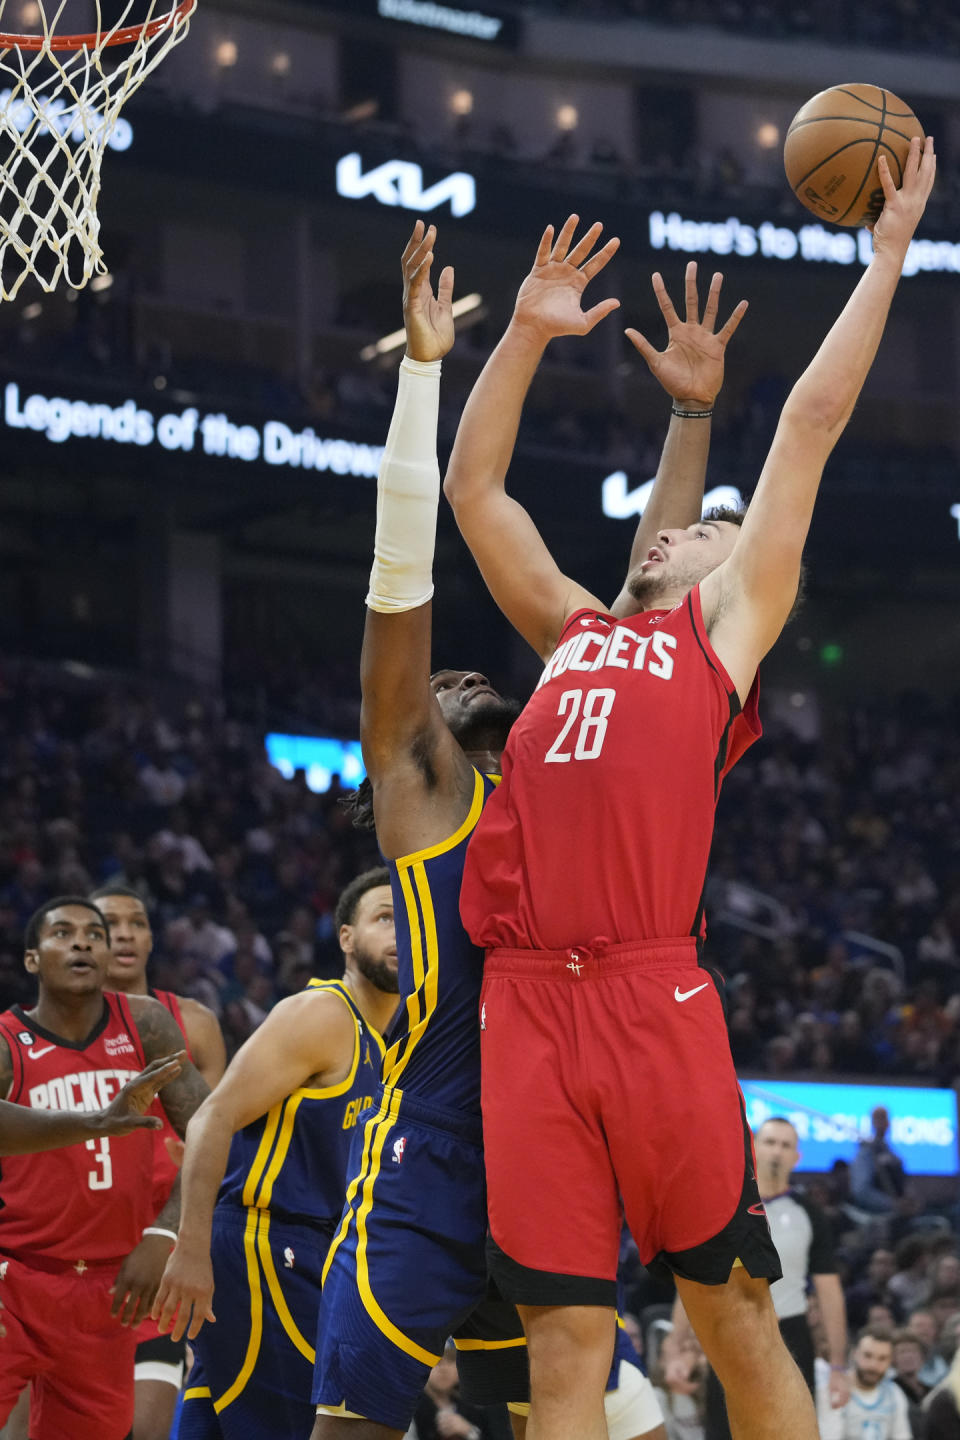 Houston Rockets center Alperen Sengun (28) shoots while defended by Golden State Warriors center Kevon Looney during the first half of an NBA basketball game in San Francisco, Saturday, Dec. 3, 2022. (AP Photo/Godofredo A. Vásquez)